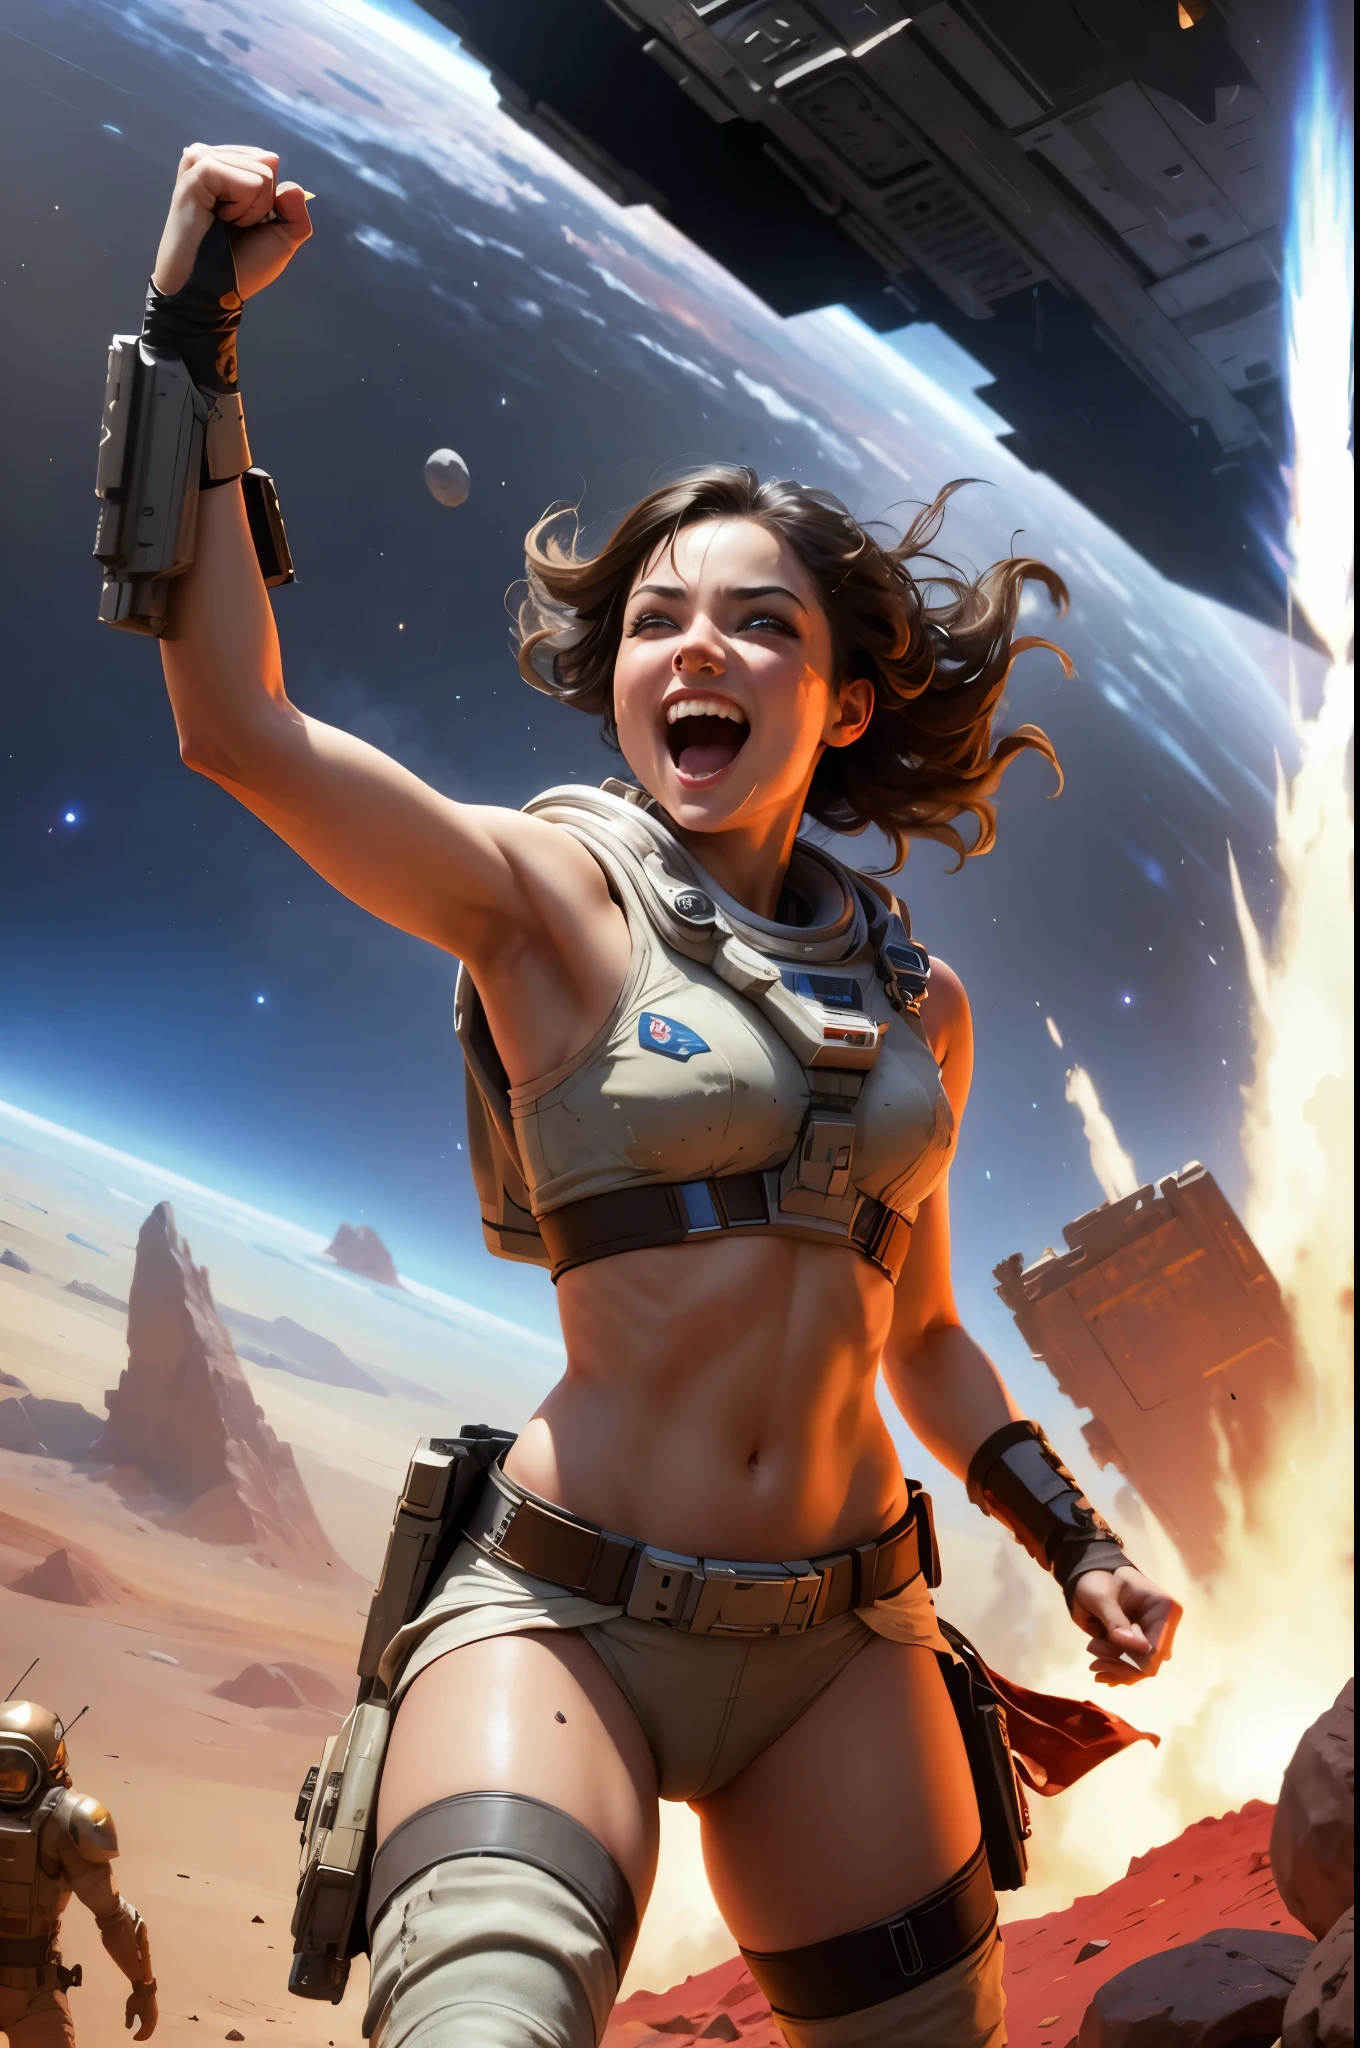 sanding arms raised high in victory looking happy elated cheering victory, space gal after the battle, cocky, finger off trigger of gun, ready to move, dirty grimy, overhead glow lighting, side light, resolution tight barbarian woman in space clothes, camouflage, hyperdetailed, abandoned room background setting on battlefield mars, Space Gal who do you think you are your inner-self your ego 34k resolution highly detailed, hyperrealism, oils painterly art style sexier, yes, on a trip to alien worlds, happy reveled expression mouth closed, eyes wide, science fiction, blood and black, detailed,